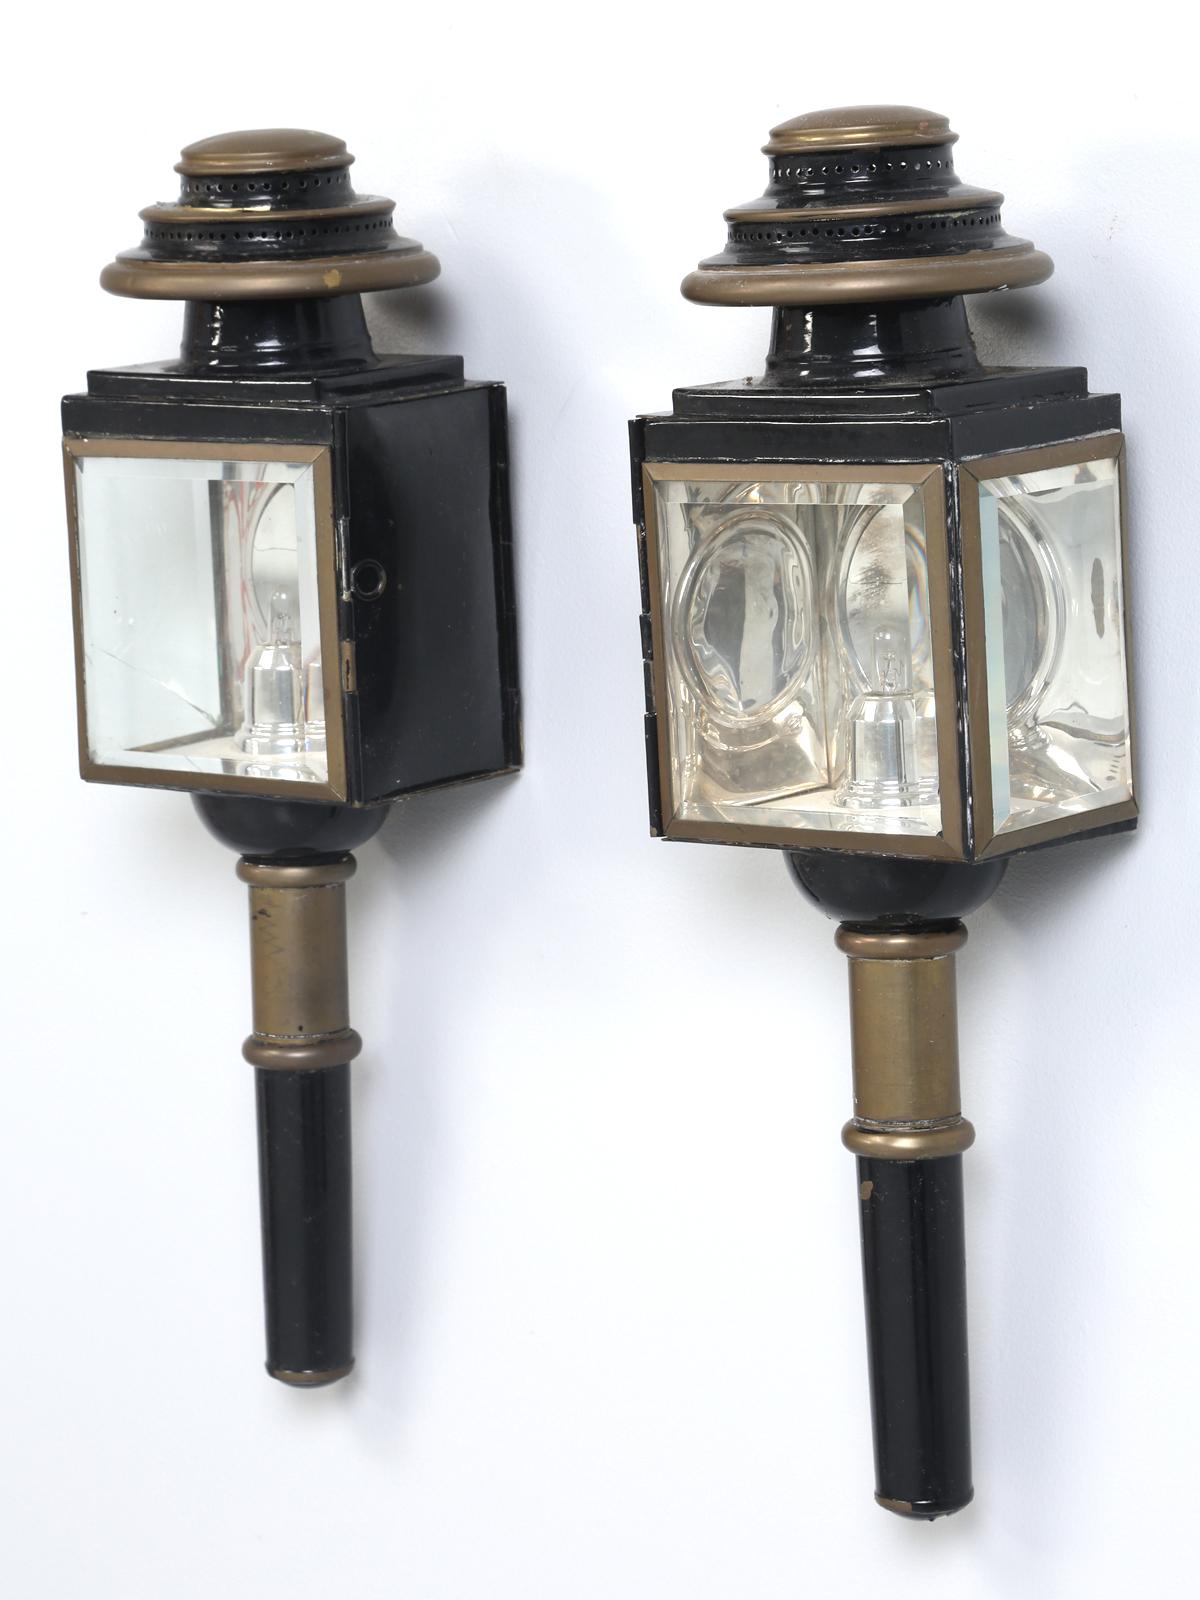 Elegant pair of European Coach Lights (sconces), that we purchased in England from our favourite antique dealer in Leek. Our Old Plank electrical department, wired the antique coach lights and essentially converted the coach lights into wall